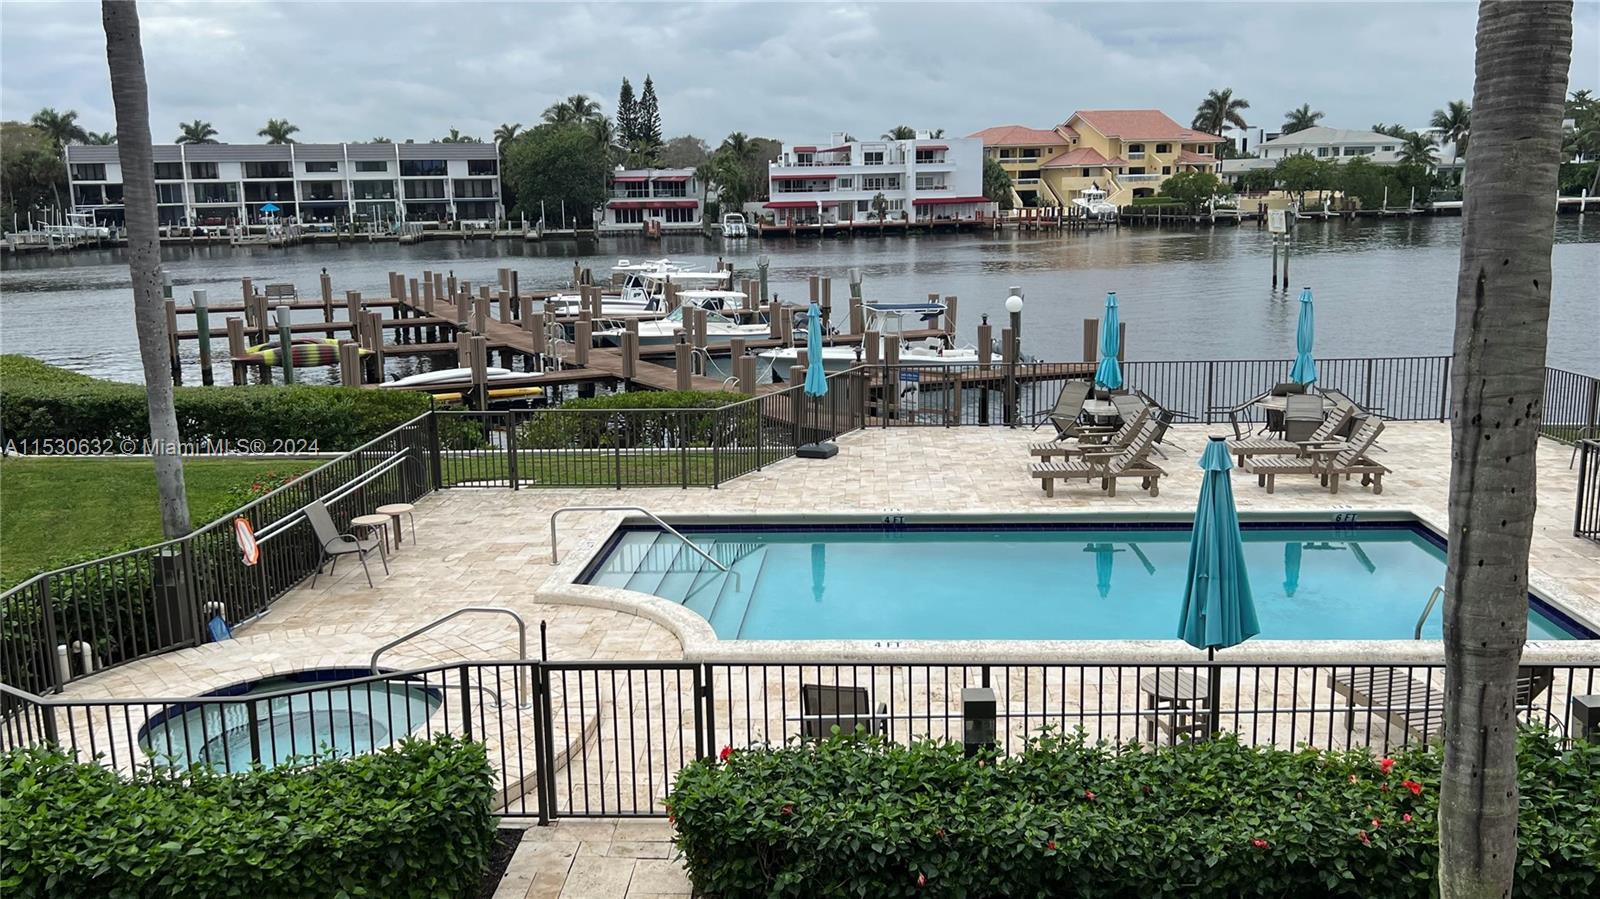 This stunning condo offers unparalleled sunset views of the Intracoastal Waterway with exclusive access to private pool, hot tub, marina & dock for boats up to 40' perfect for boating enthusiasts seeking the ultimate coastal lifestyle. Upon entering, you'll be greeted by an abundance of natural light, open floor plan, updated kitchen, breathtaking panoramic vistas of the Pool, Marina & ICW, creating a serene ambiance that is truly unmatched. Your private balconies provide captivating sights & sounds of the waterfront lifestyle. Whether you're enjoying your morning coffee or hosting soirées, this outdoor oasis provides the perfect backdrop for relaxation & entertainment. Immediate Rentals allowed, very close to the beach, restaurants & shopping. Minutes to major highways and the airport!